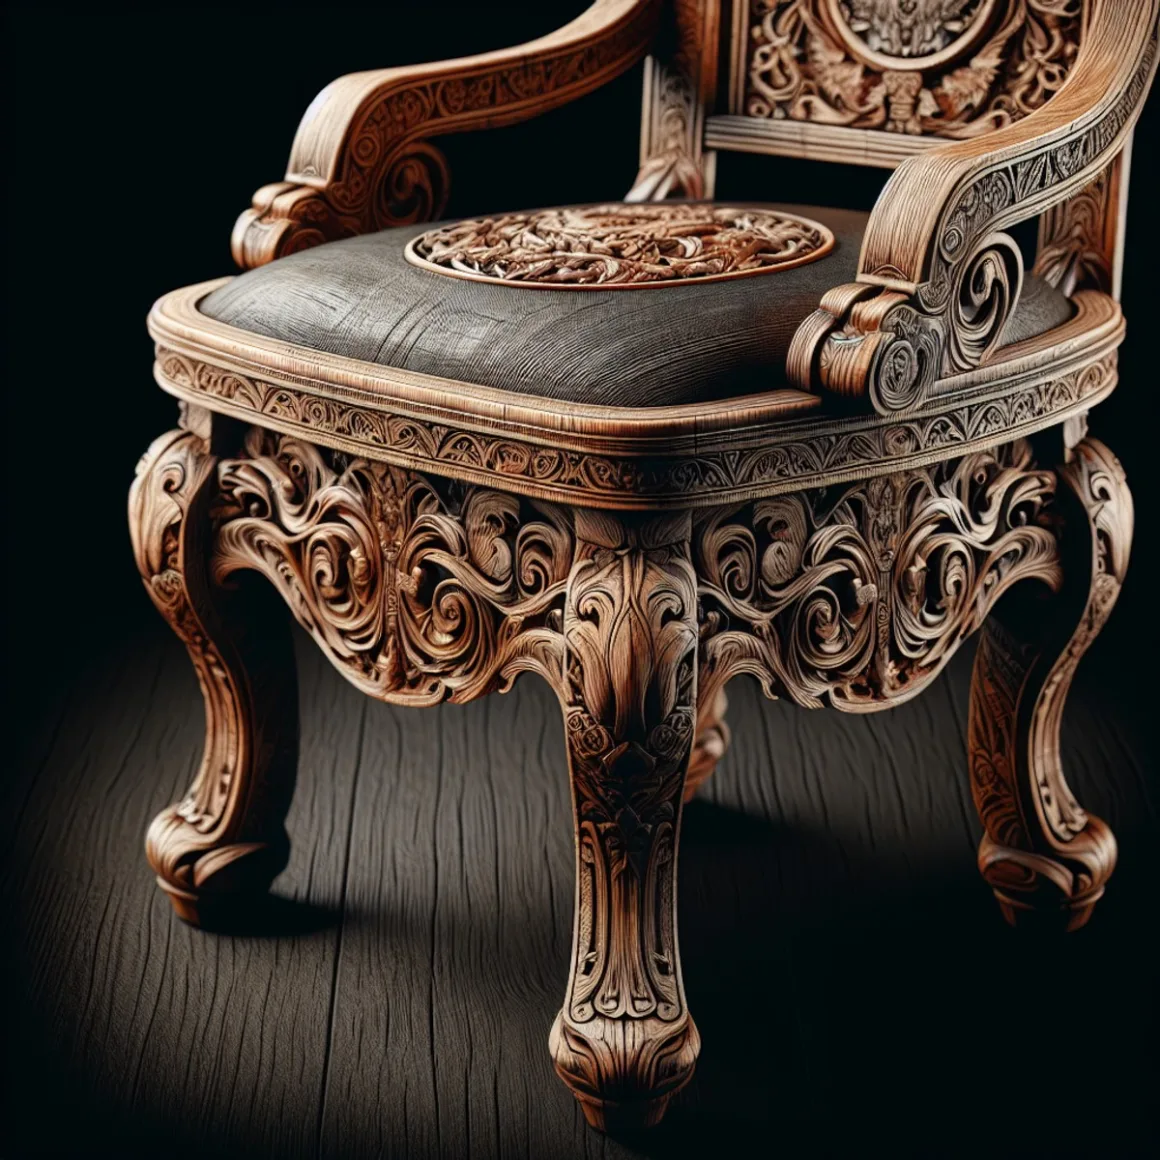 Vintage wooden chair with intricate carvings and rich patina.